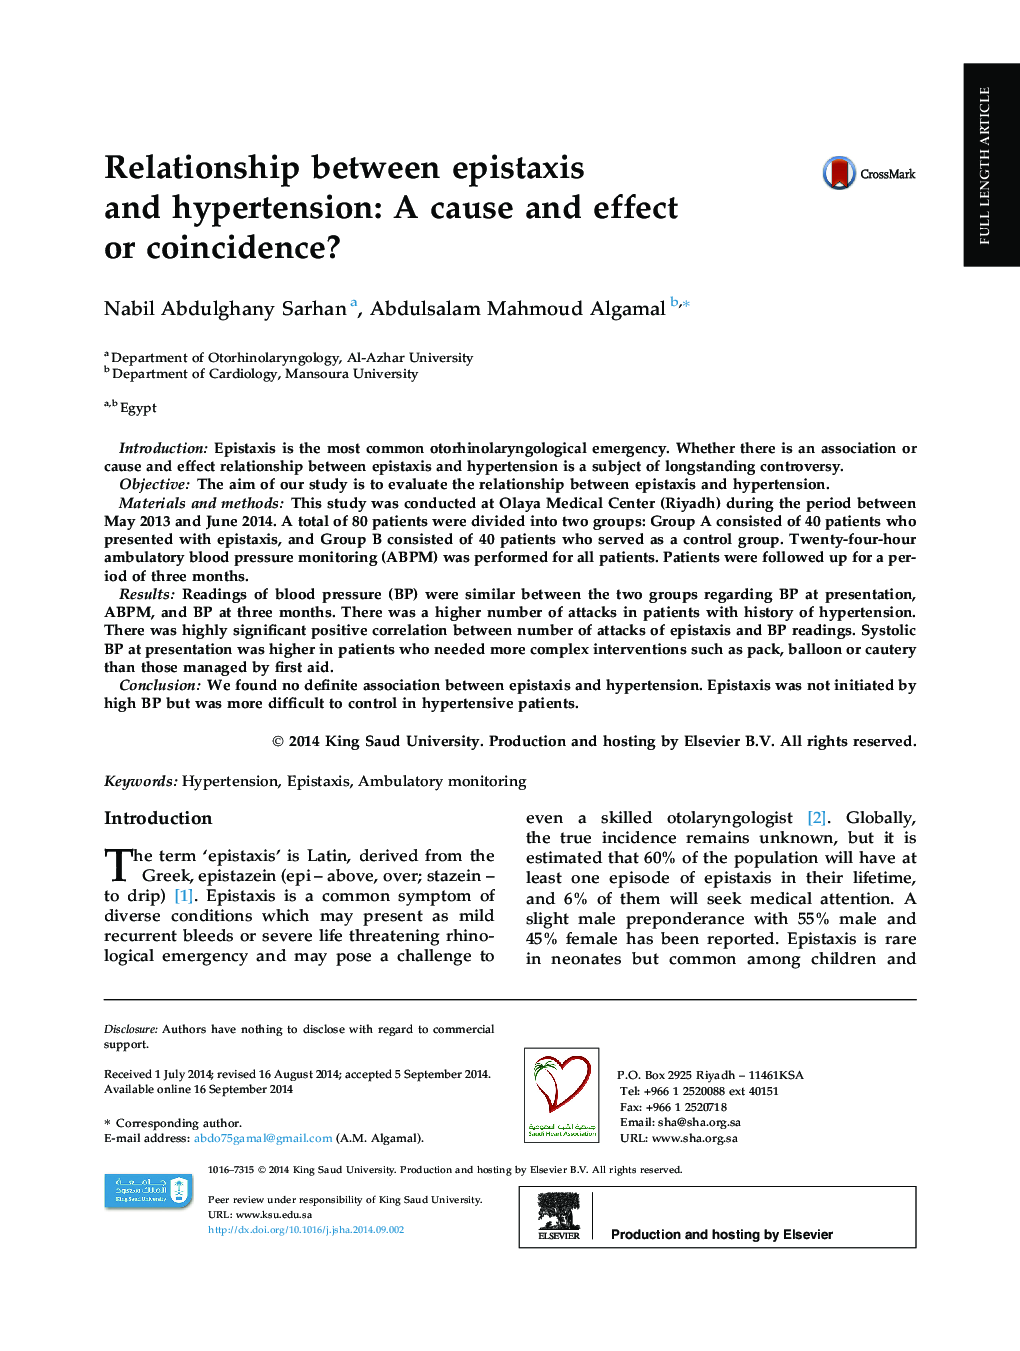 Relationship between epistaxis and hypertension: A cause and effect or coincidence? 